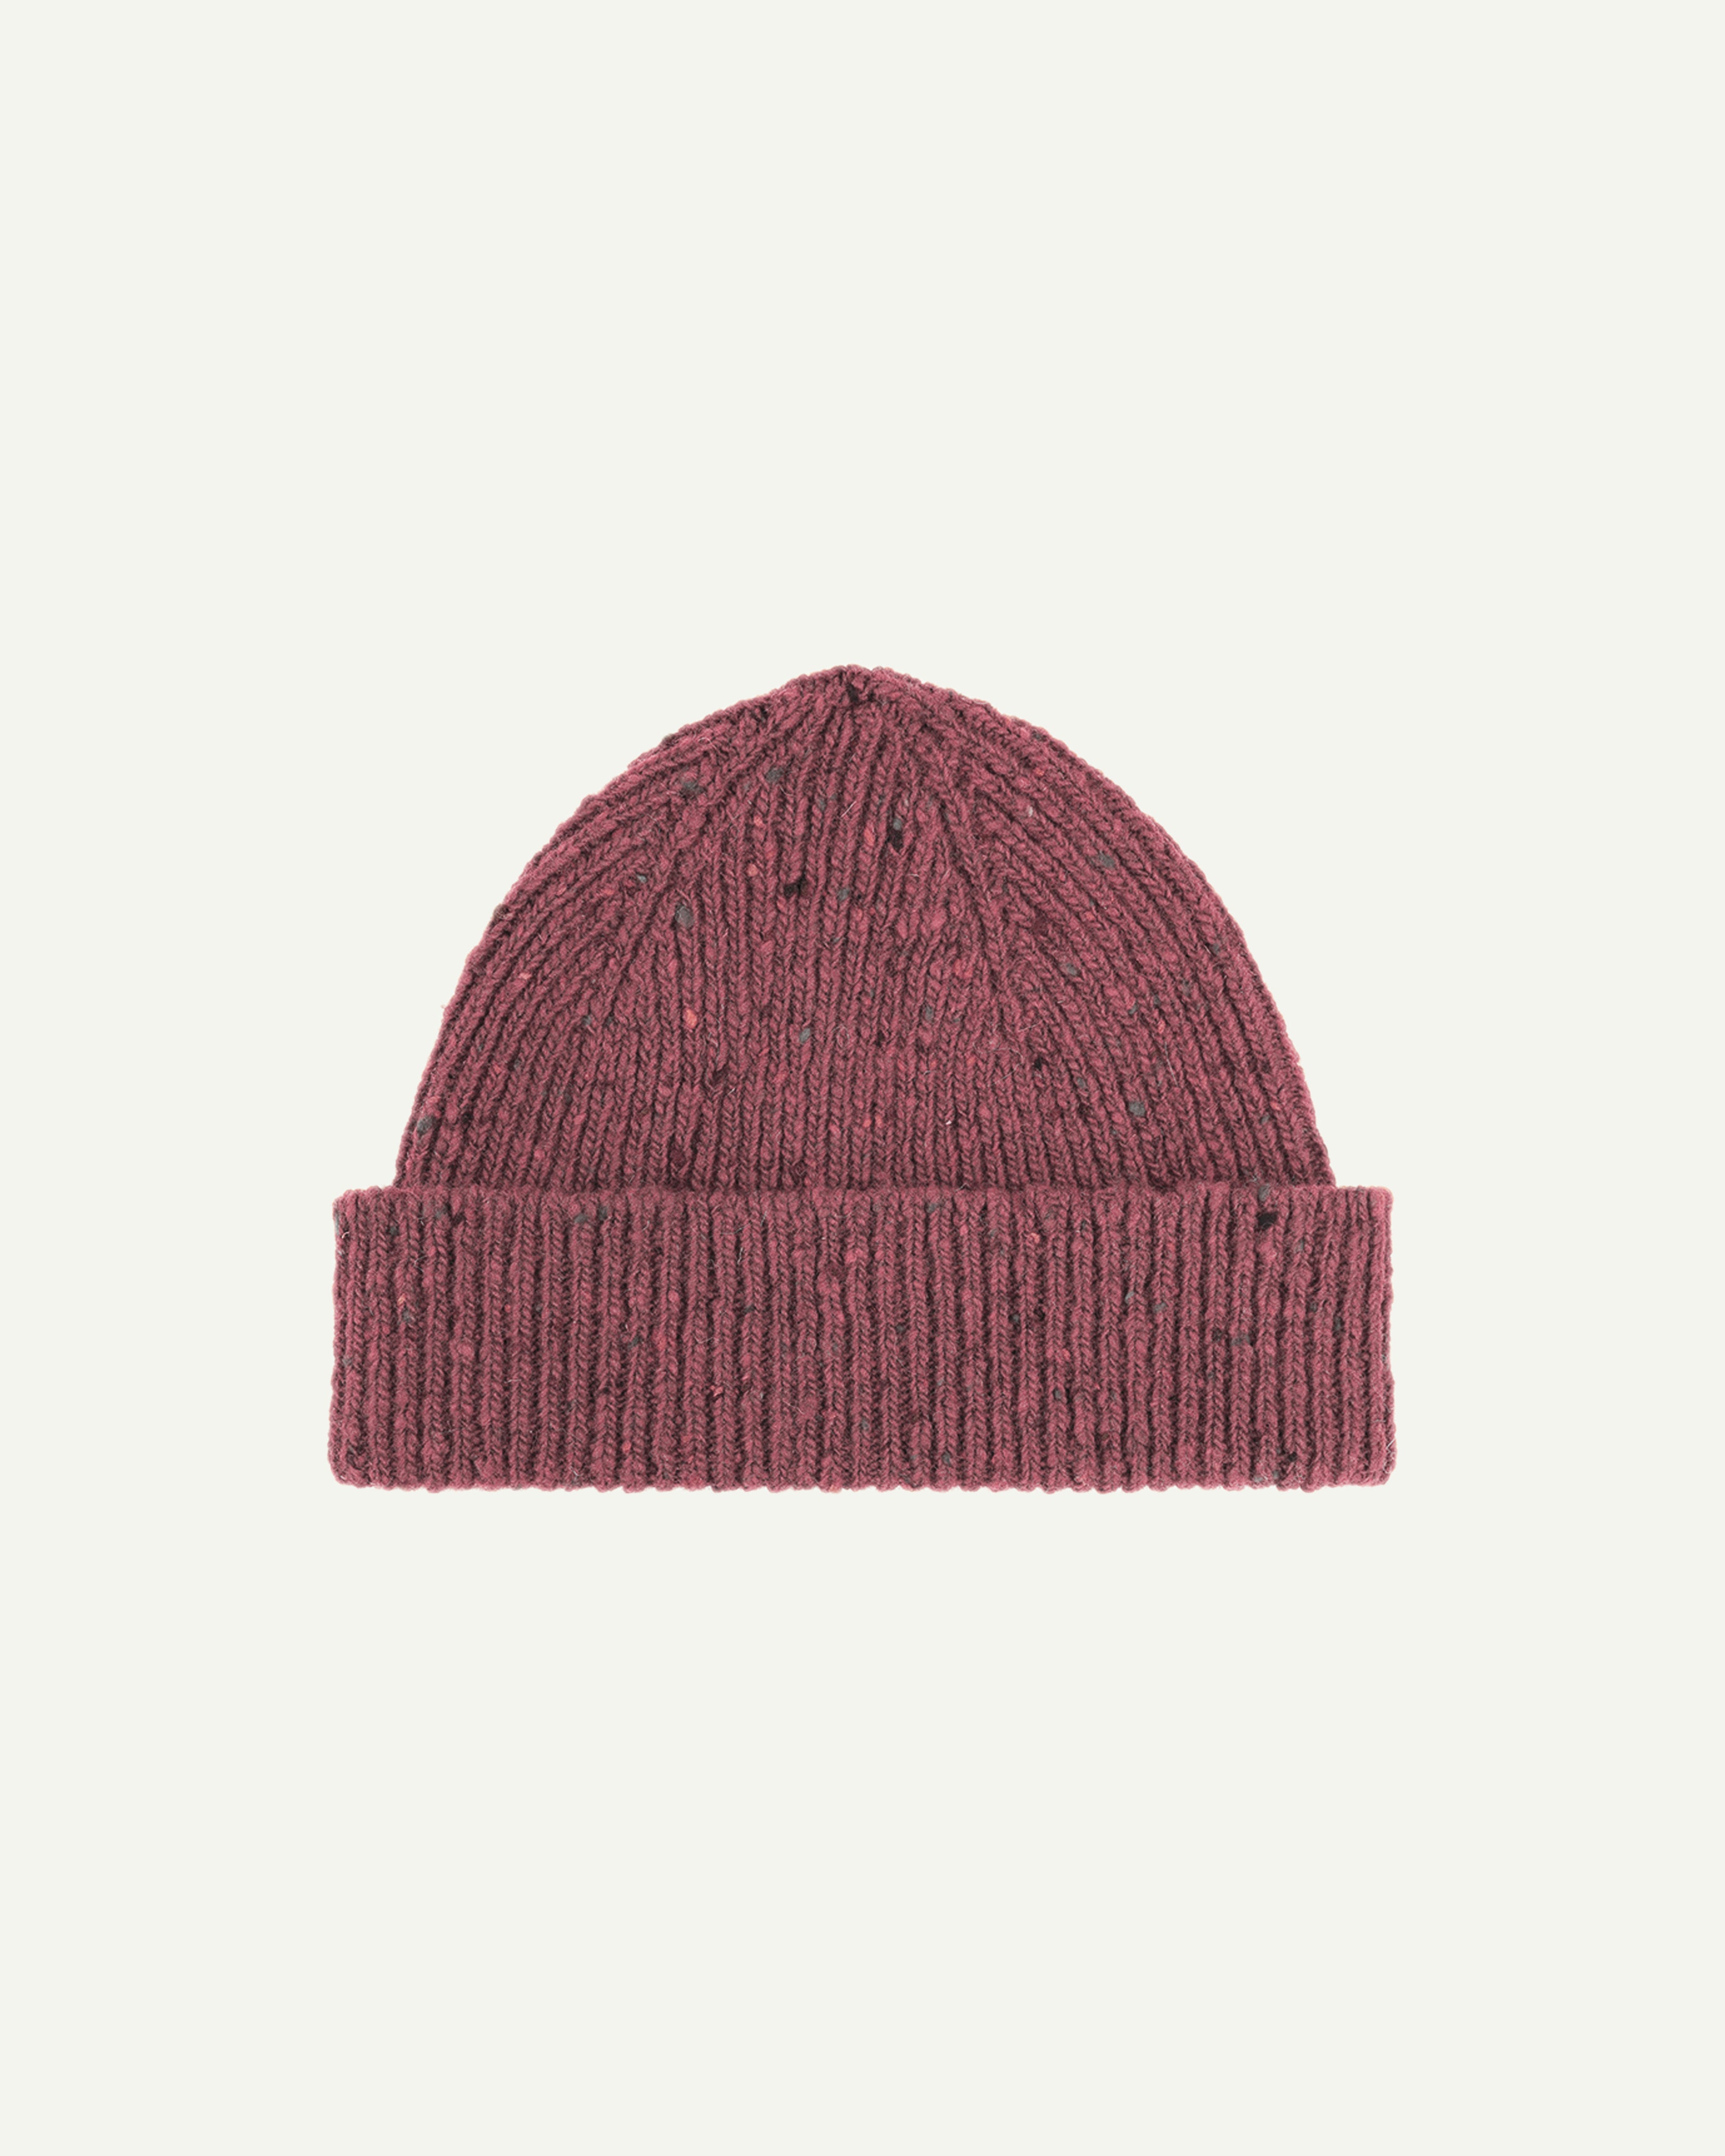  Flat view of Uskees 4003 donegal wool hat in 'dusty pink' . There is a clear view of the adjustable cuff and the 'speckled' nature of the hat.